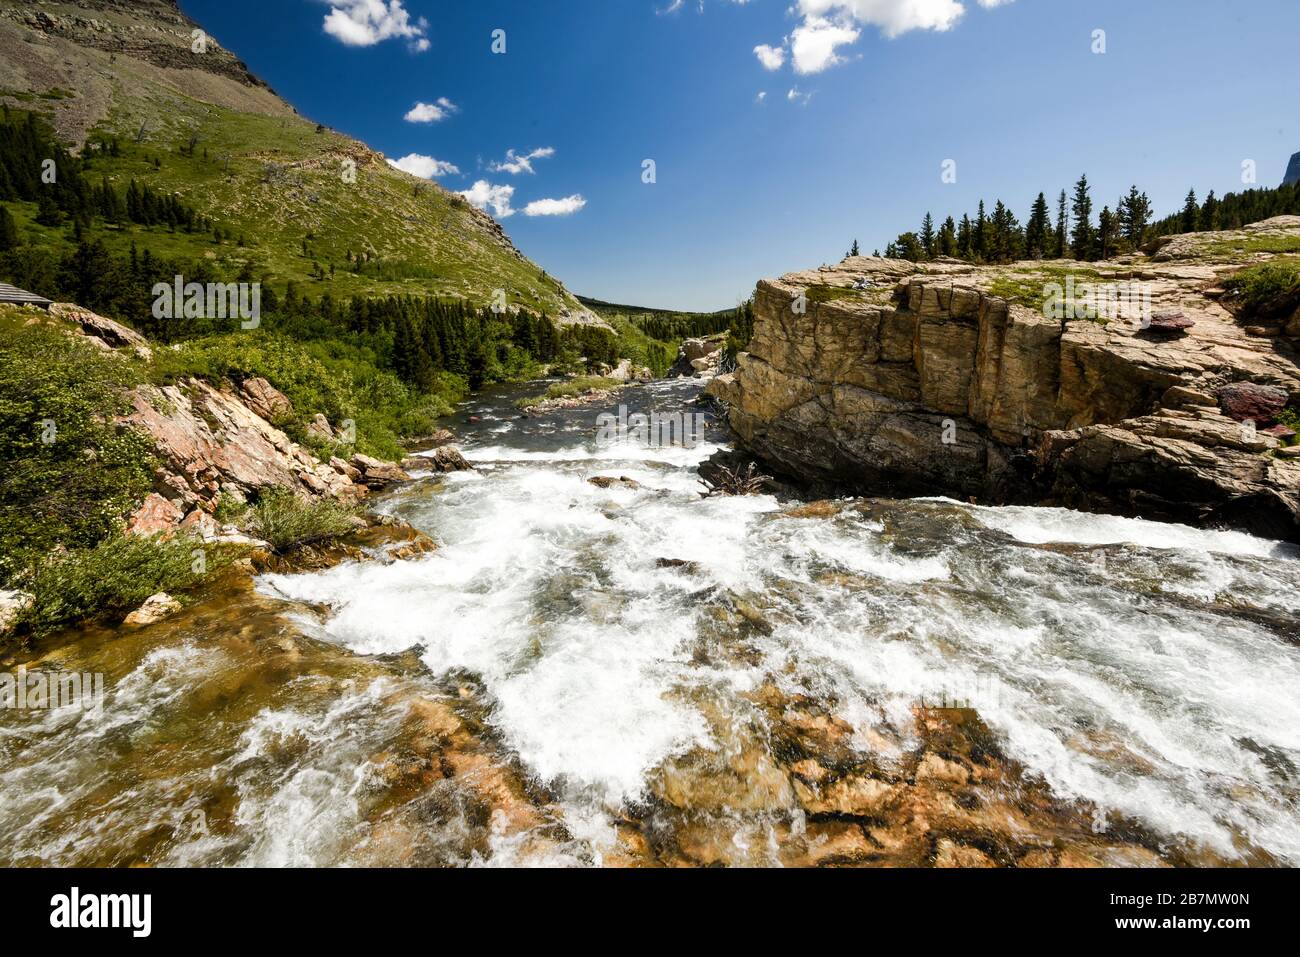 A fast flowing glacial river, rushing over rocks towards the camera in the Colorado mountains Stock Photo